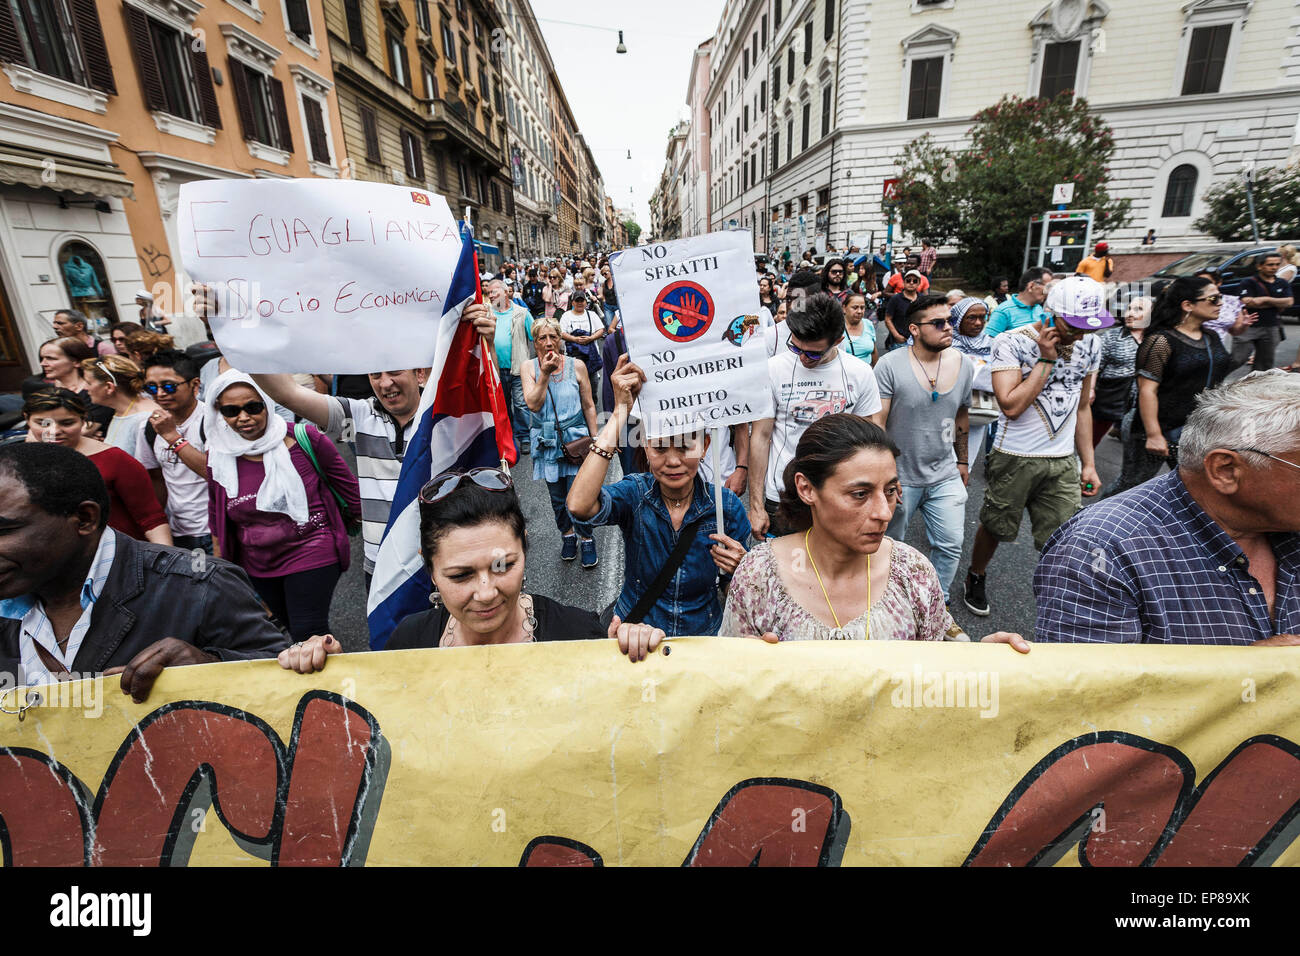 Rome, Italy. 14th May, 2015. Demonstrators gather to take part in a protest calling for an end to evictions, fairer rents and more housing in Rome . © Giuseppe Ciccia/Pacific Press/Alamy Live News Stock Photo